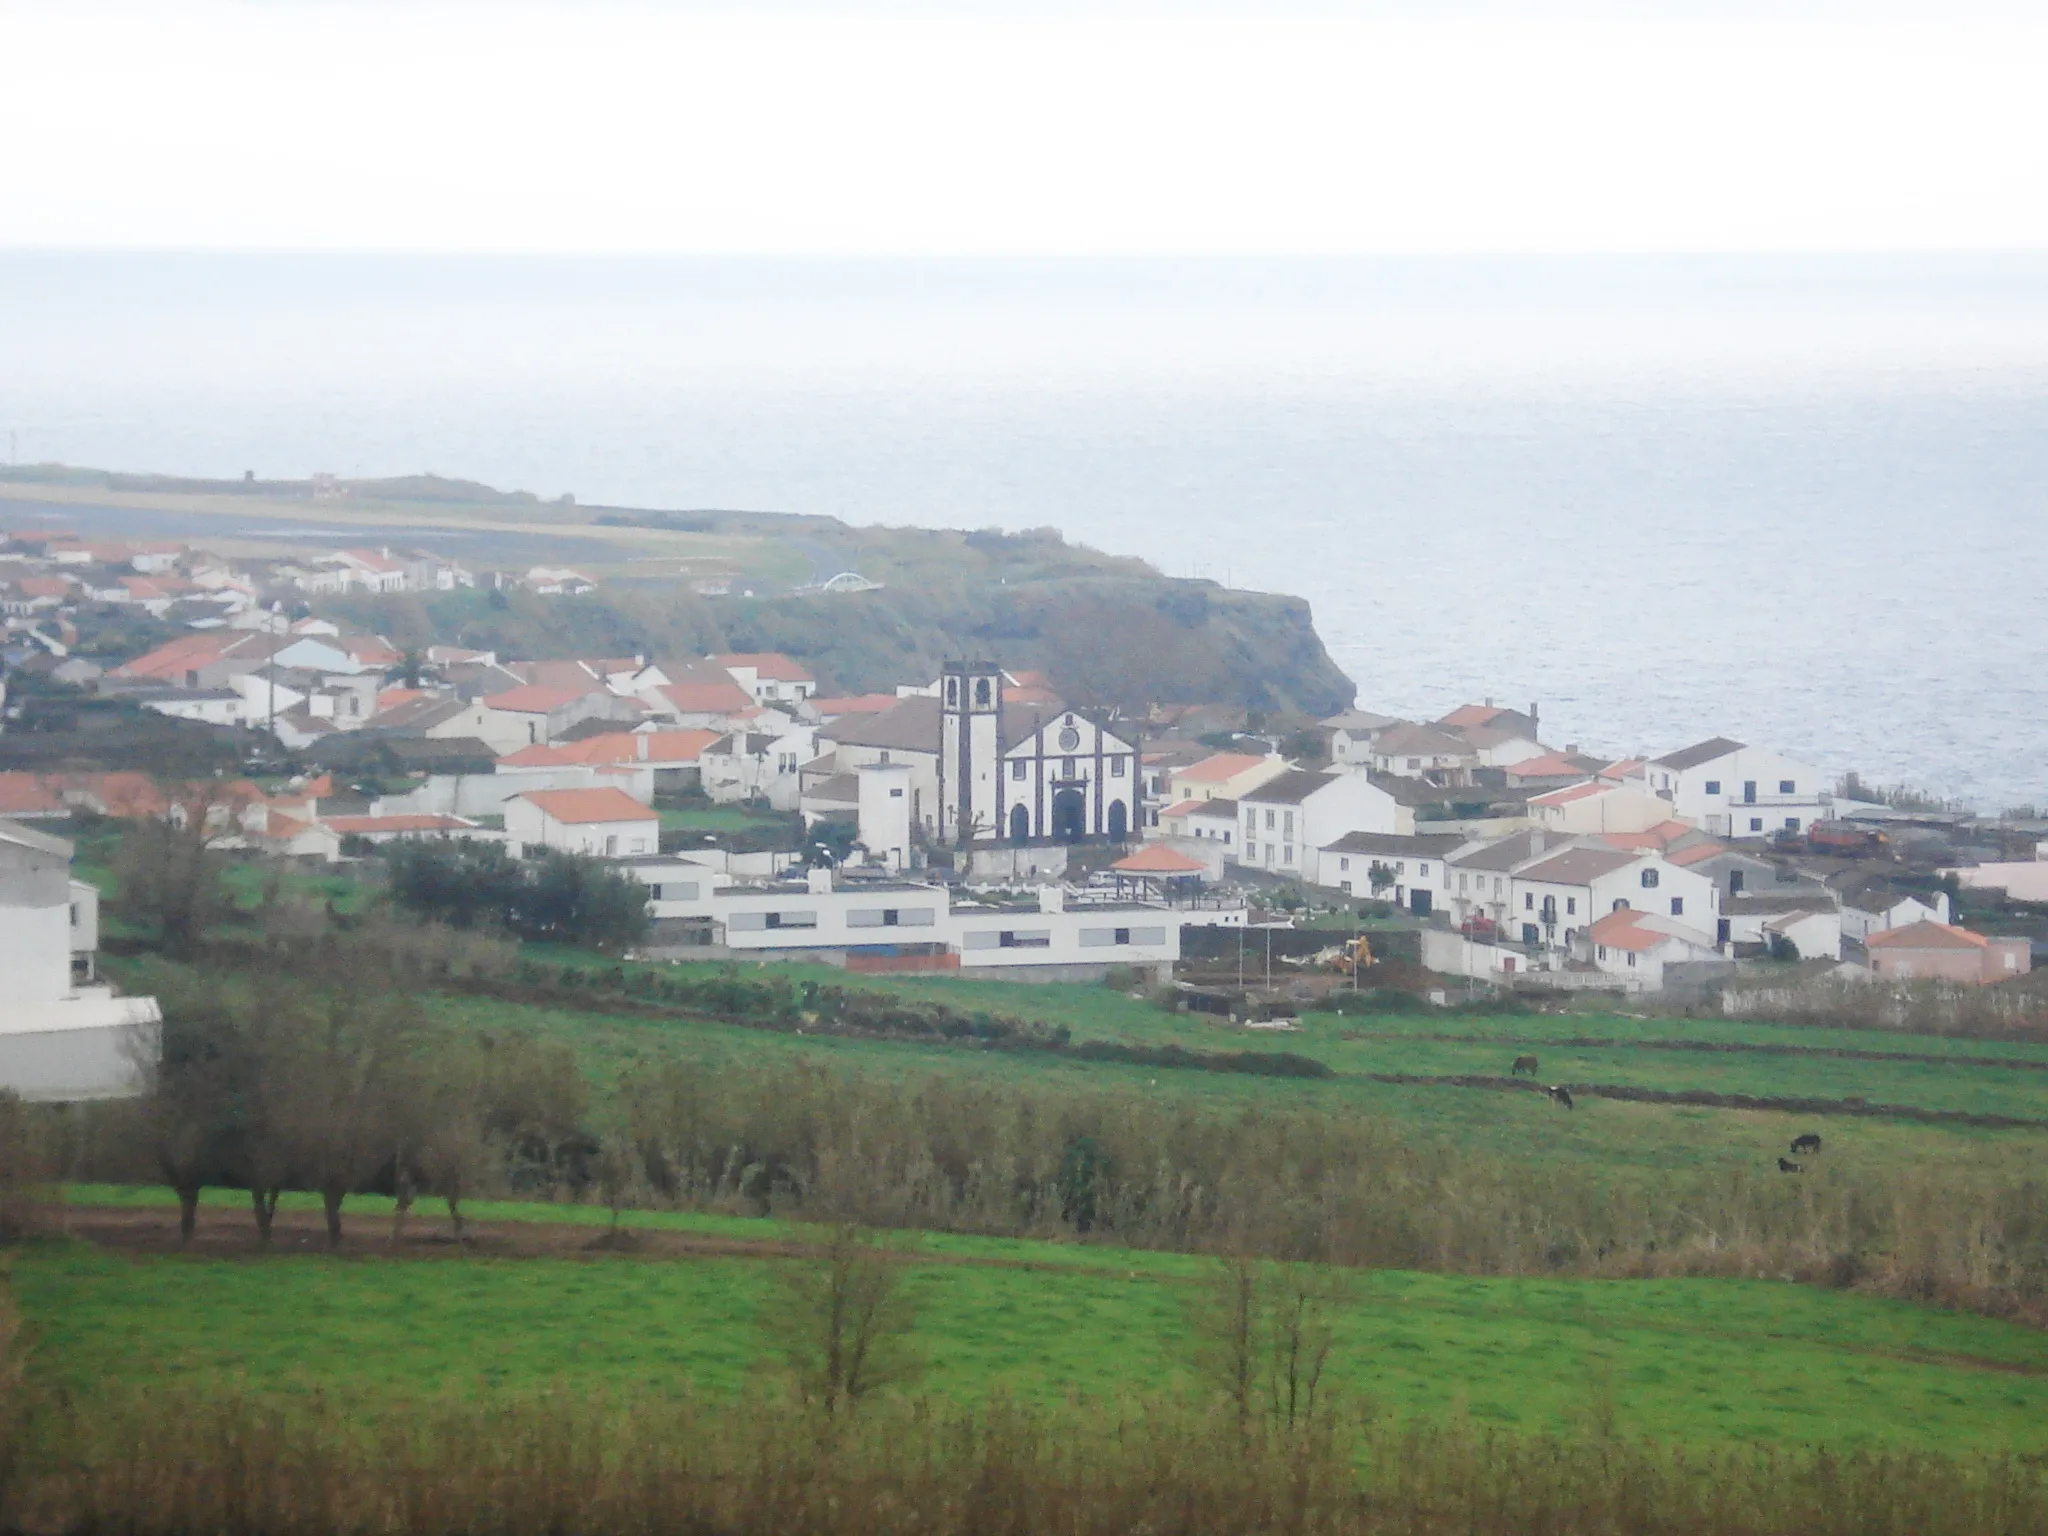 Photo showing: The village of Relva at the end of the airport on São Miguel Island, Azores